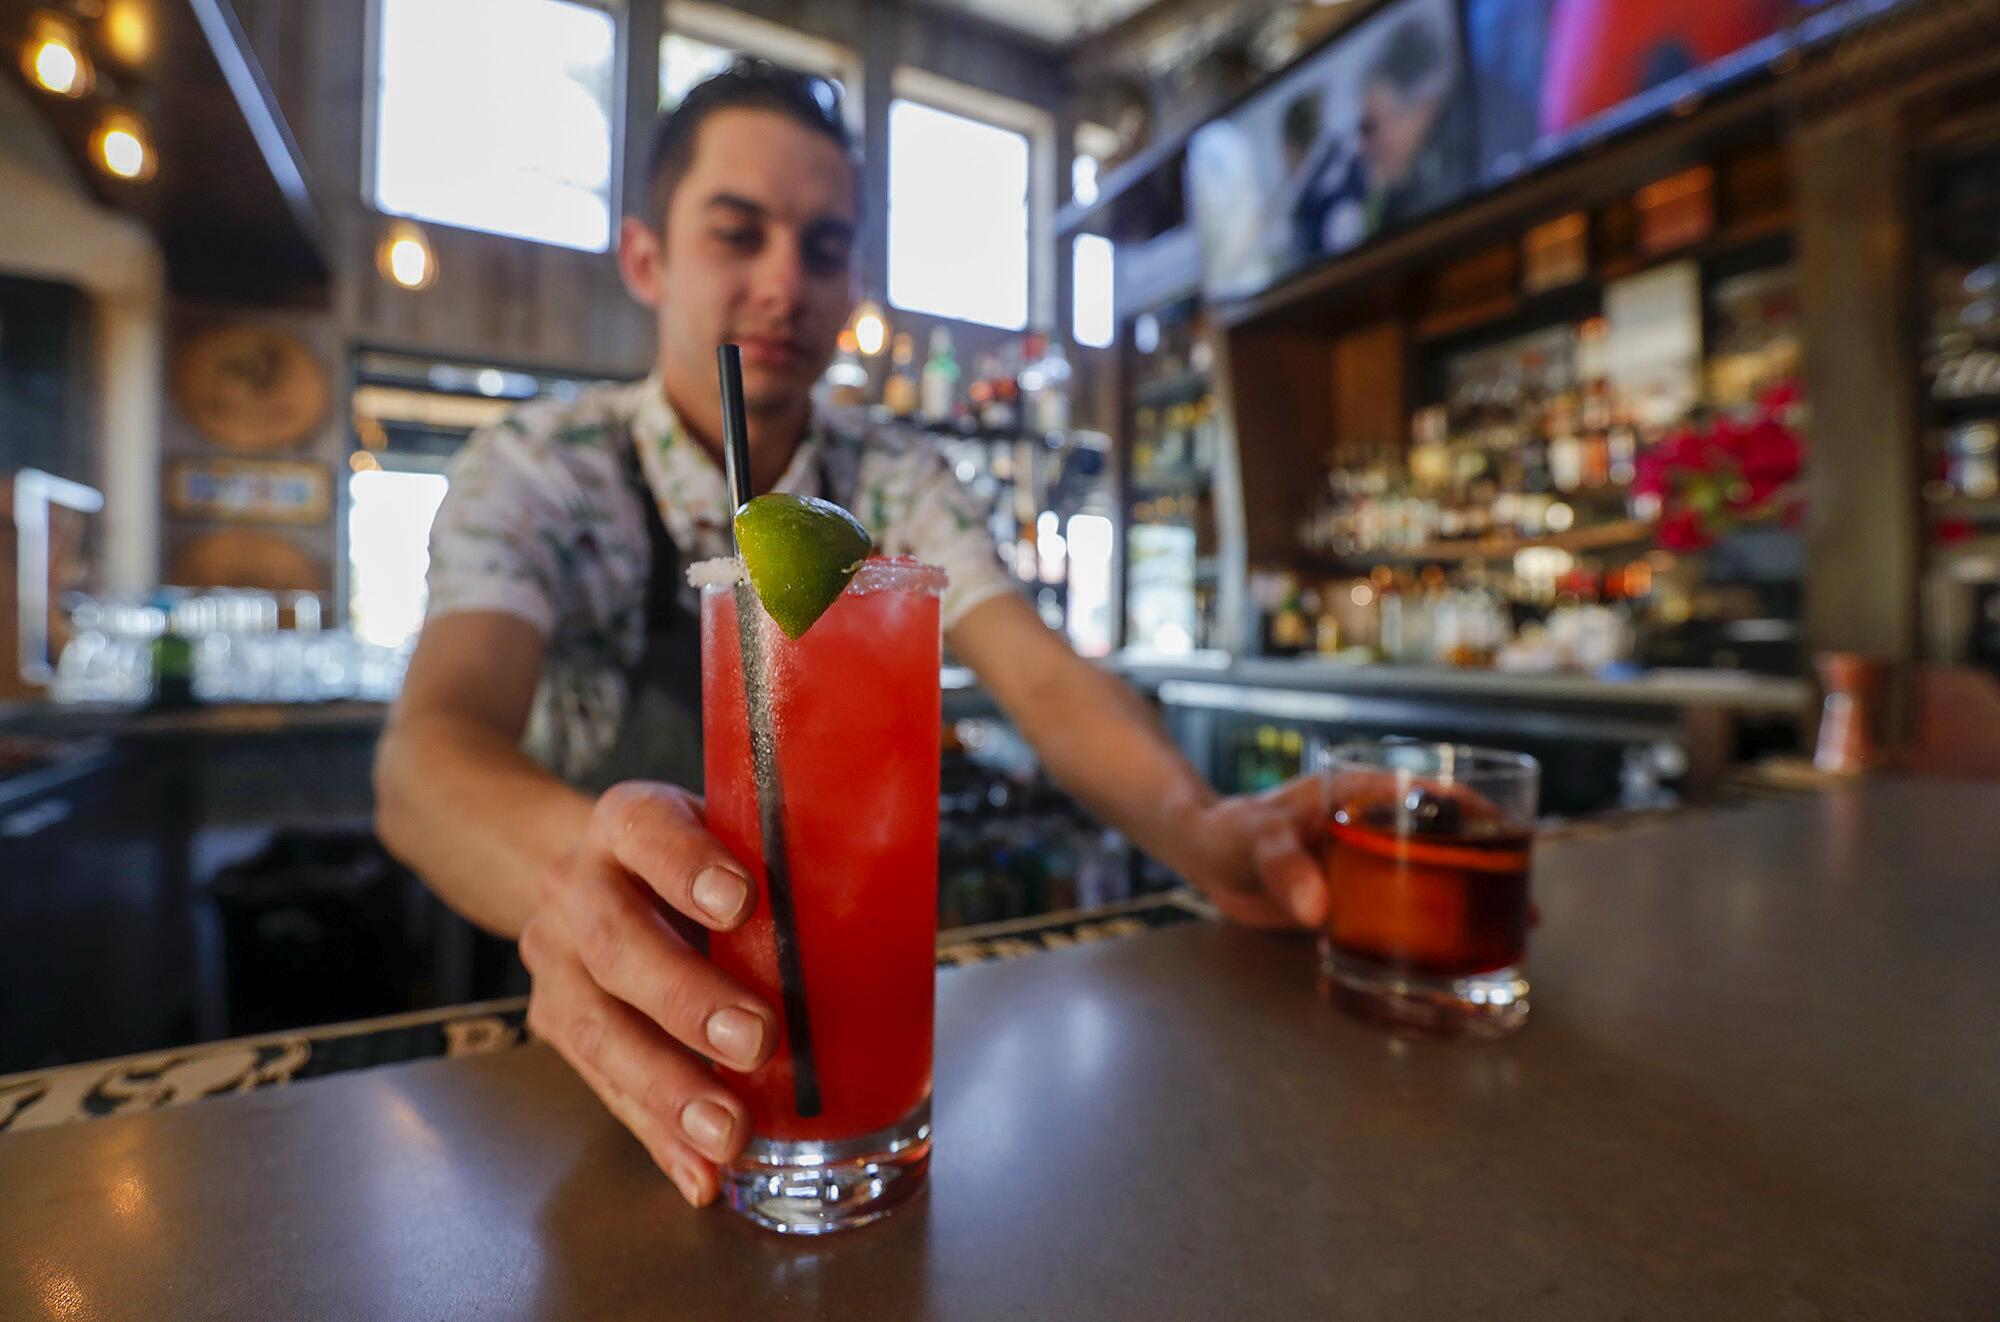 Bartender Nate Murguia serves a seasonal margarita and a Craft House old fashioned at the Craft House in Dana Point.